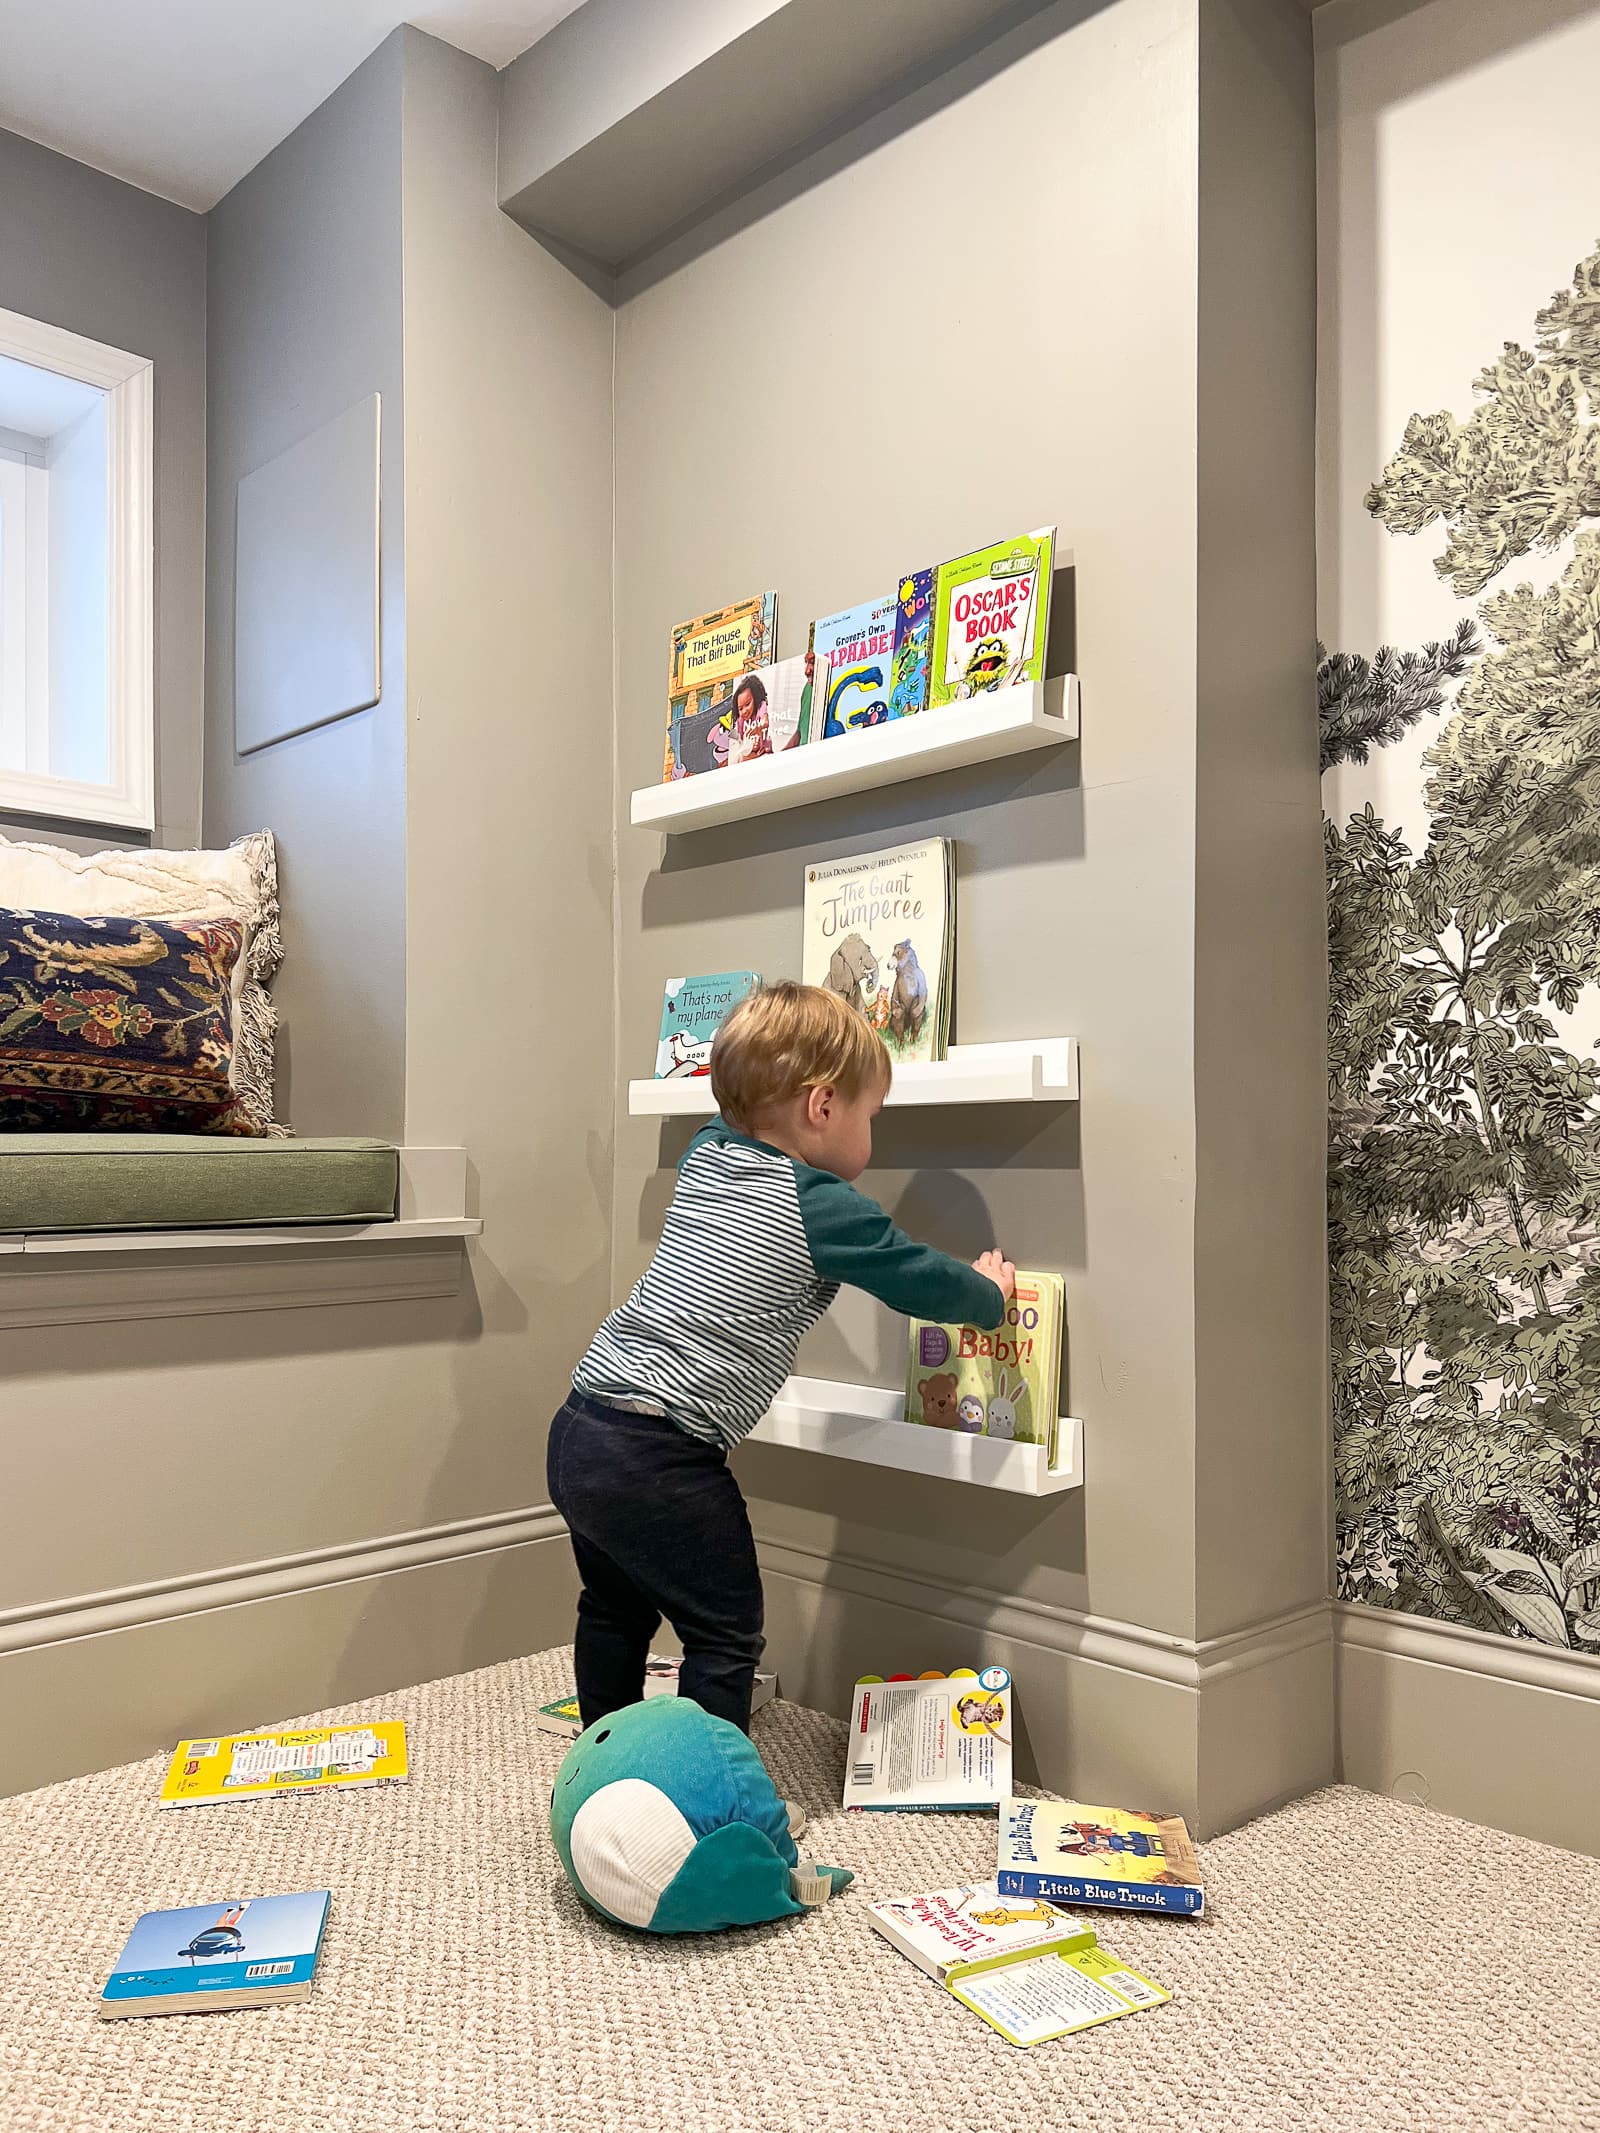 Ellis using the reading nook and book ledges